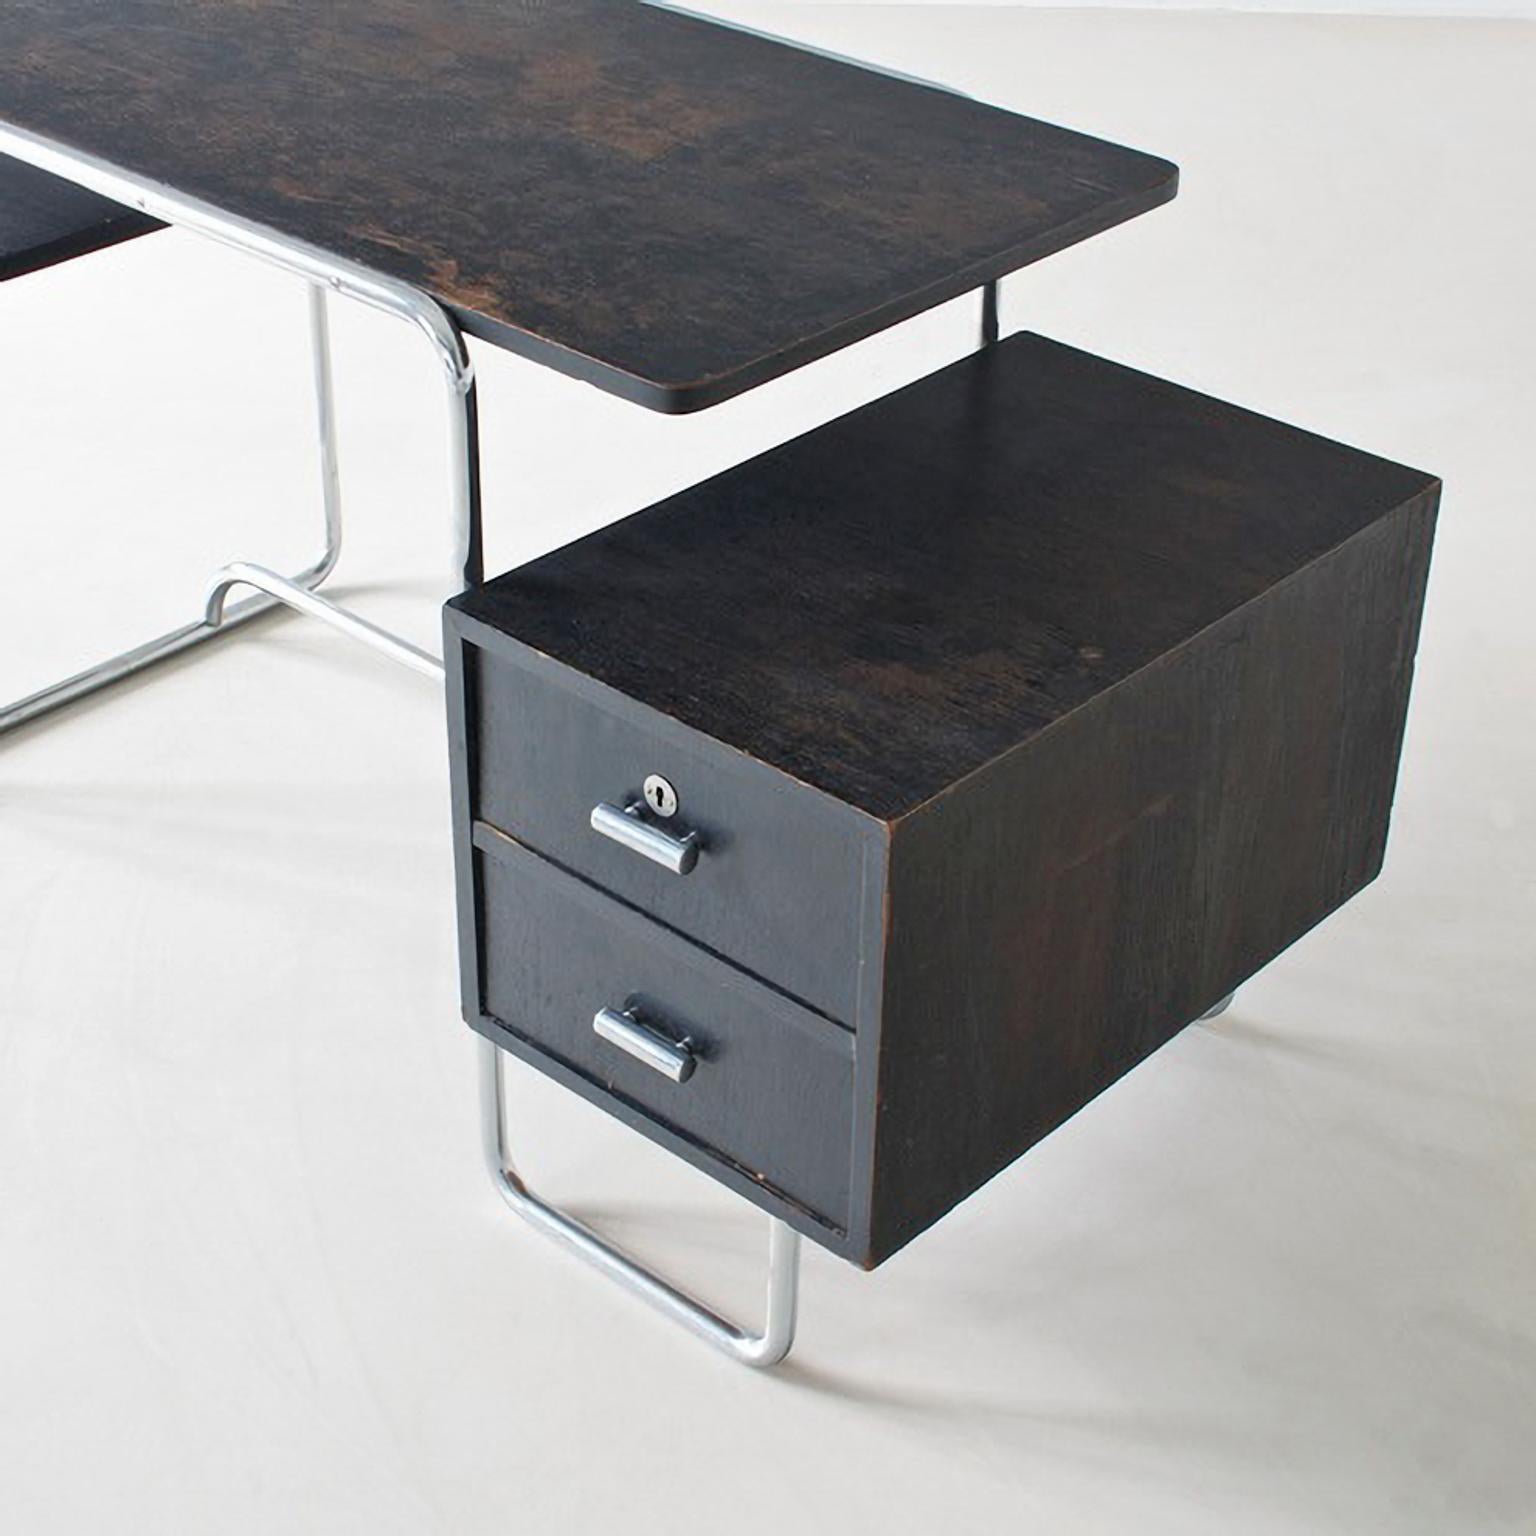 Modernist Tubular Steel Desk, Stained Wood, Chromium Plated Metall, c. 1930 In Good Condition For Sale In Berlin, DE